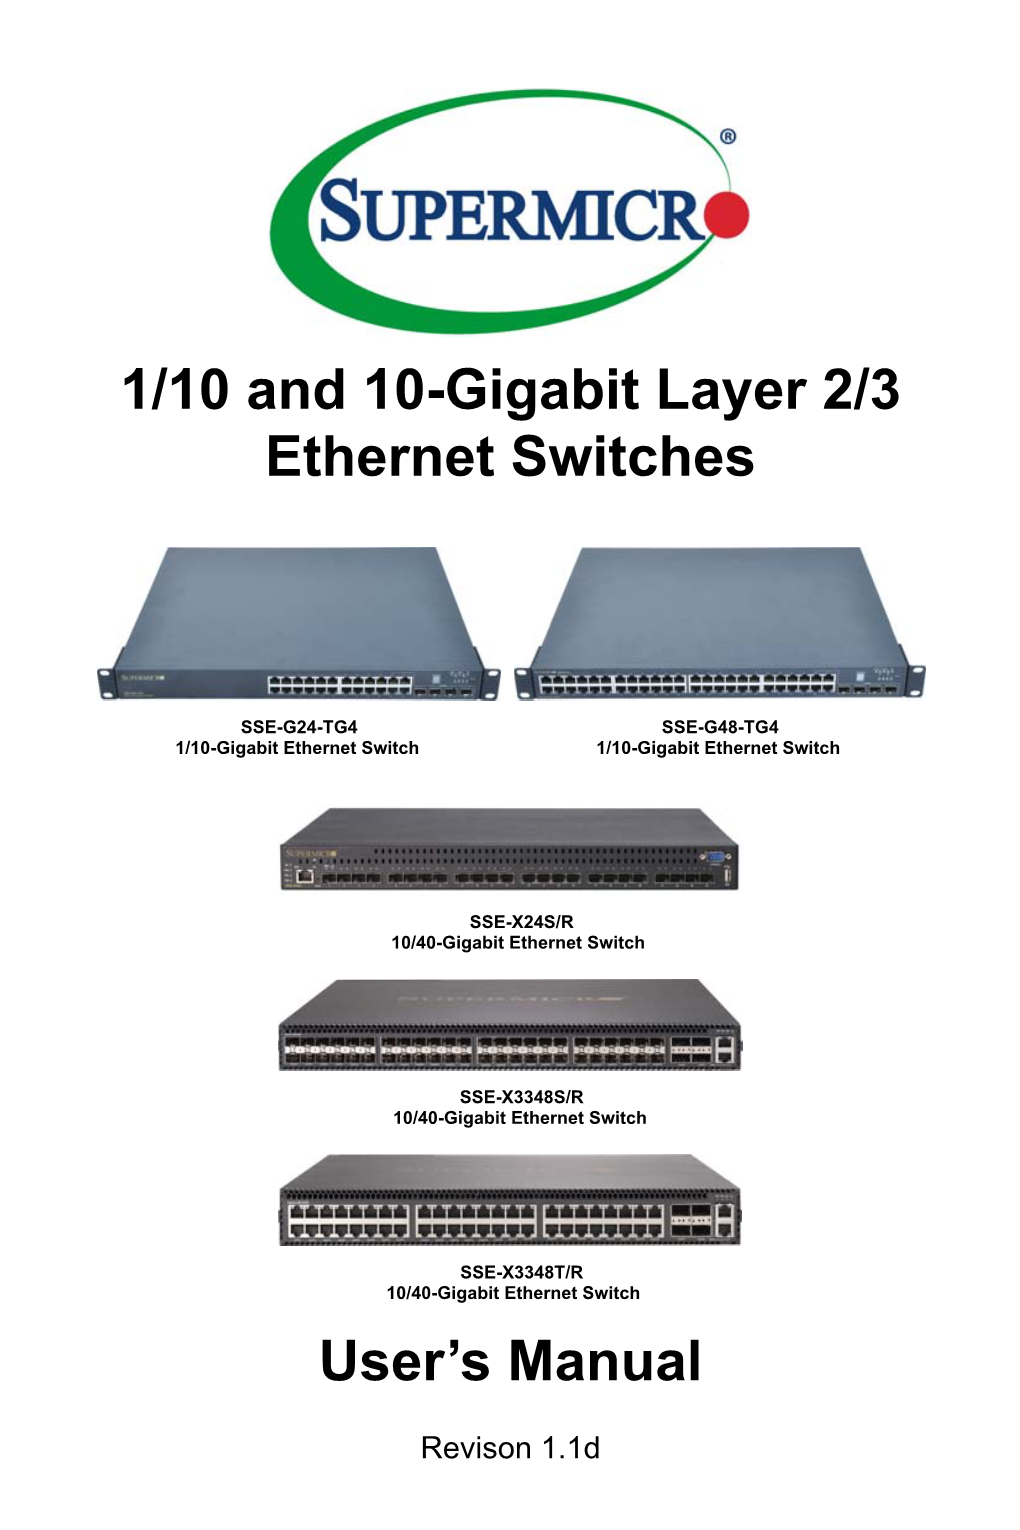 1/10 and 10-Gigabit Layer 2/3 Ethernet Switches User's Manual